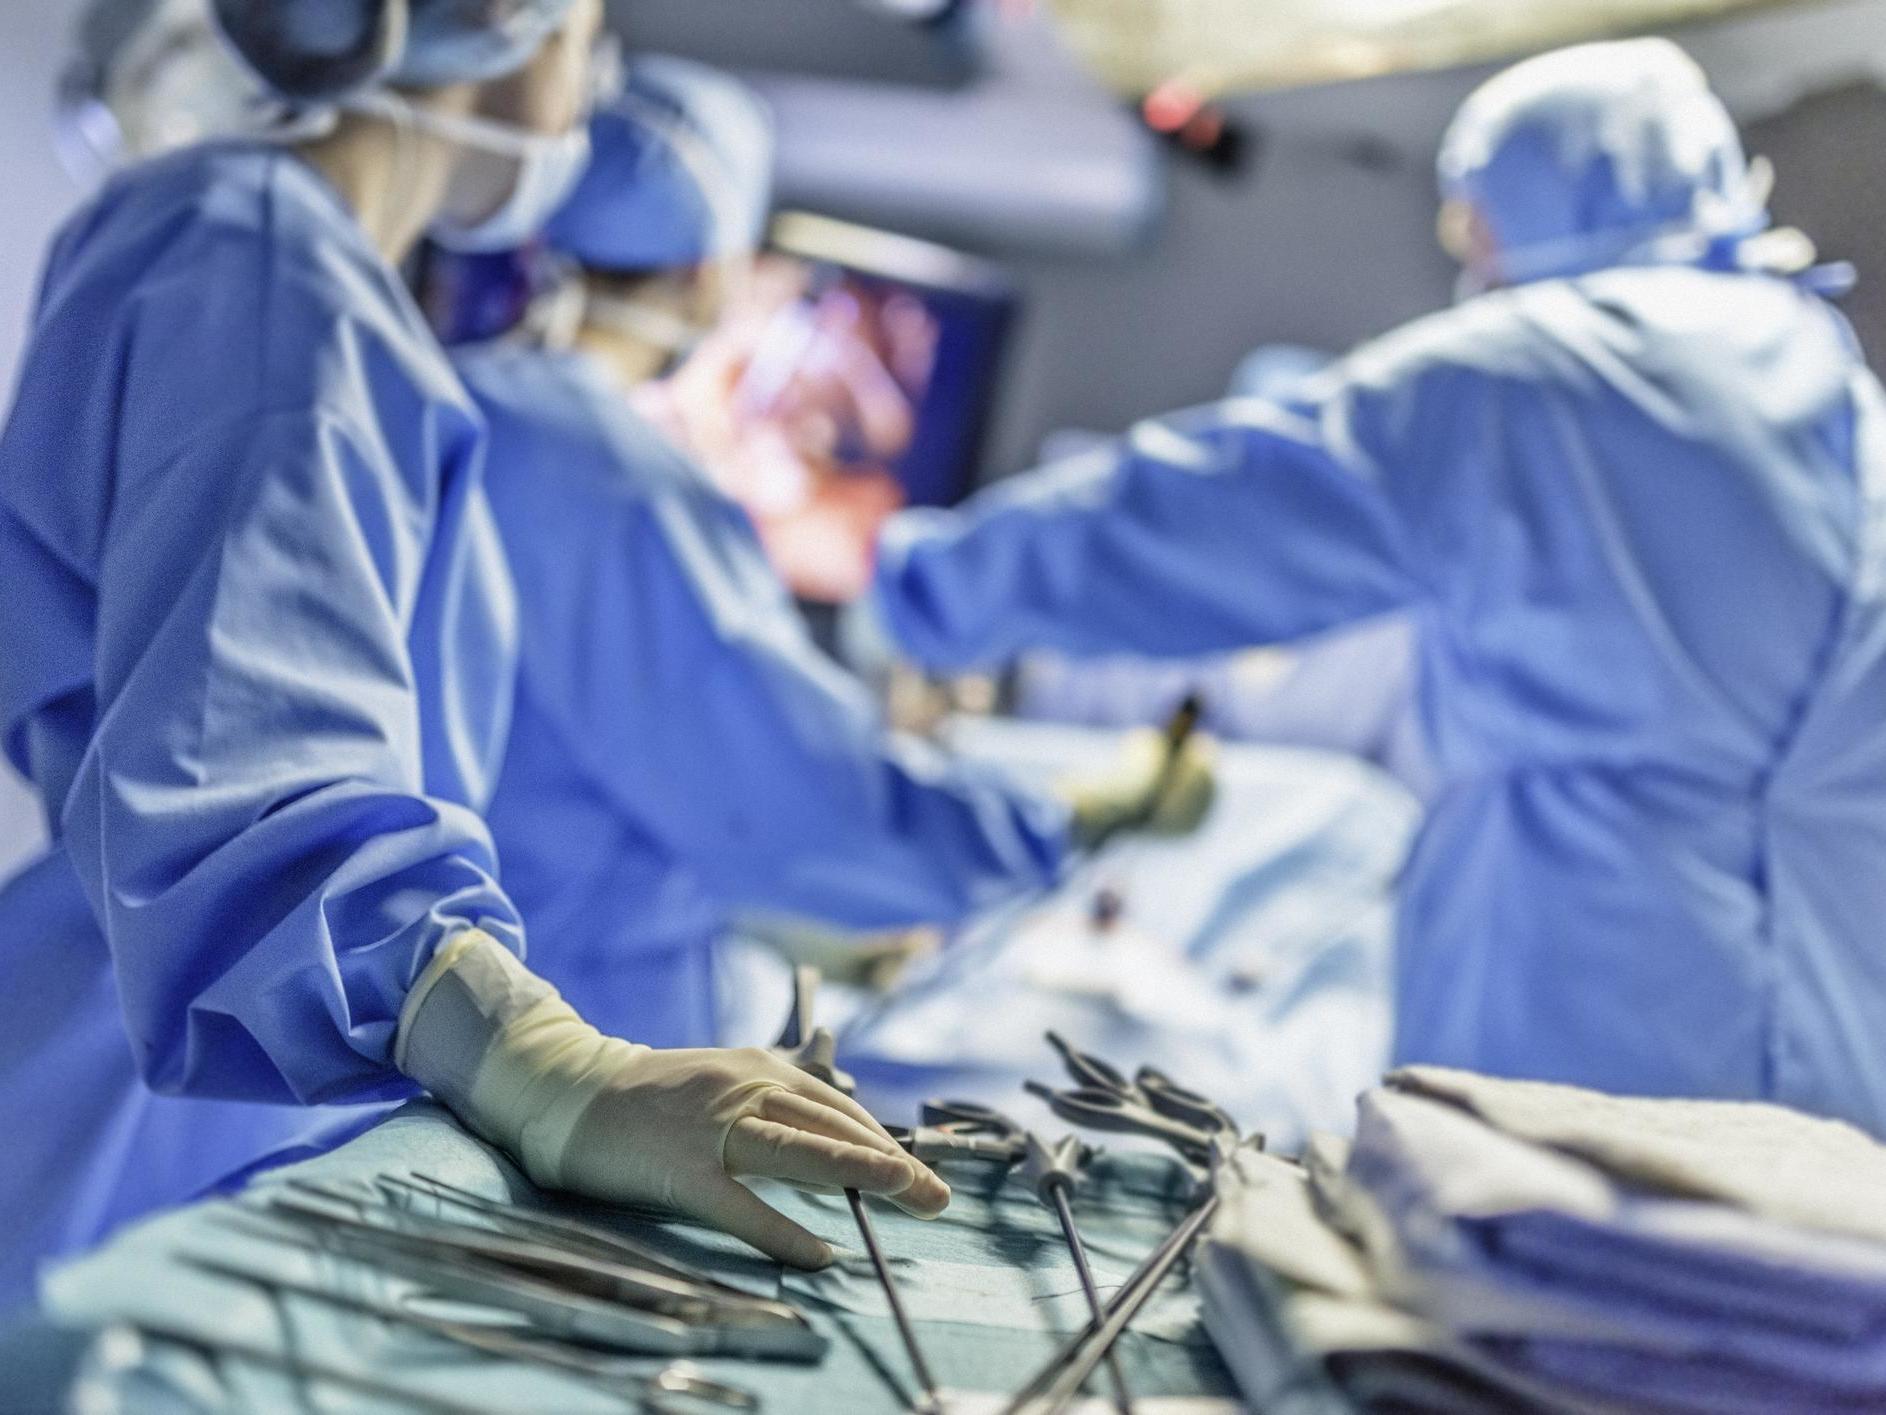 Experts are worried about the backlog of cancelled surgeries in the NHS